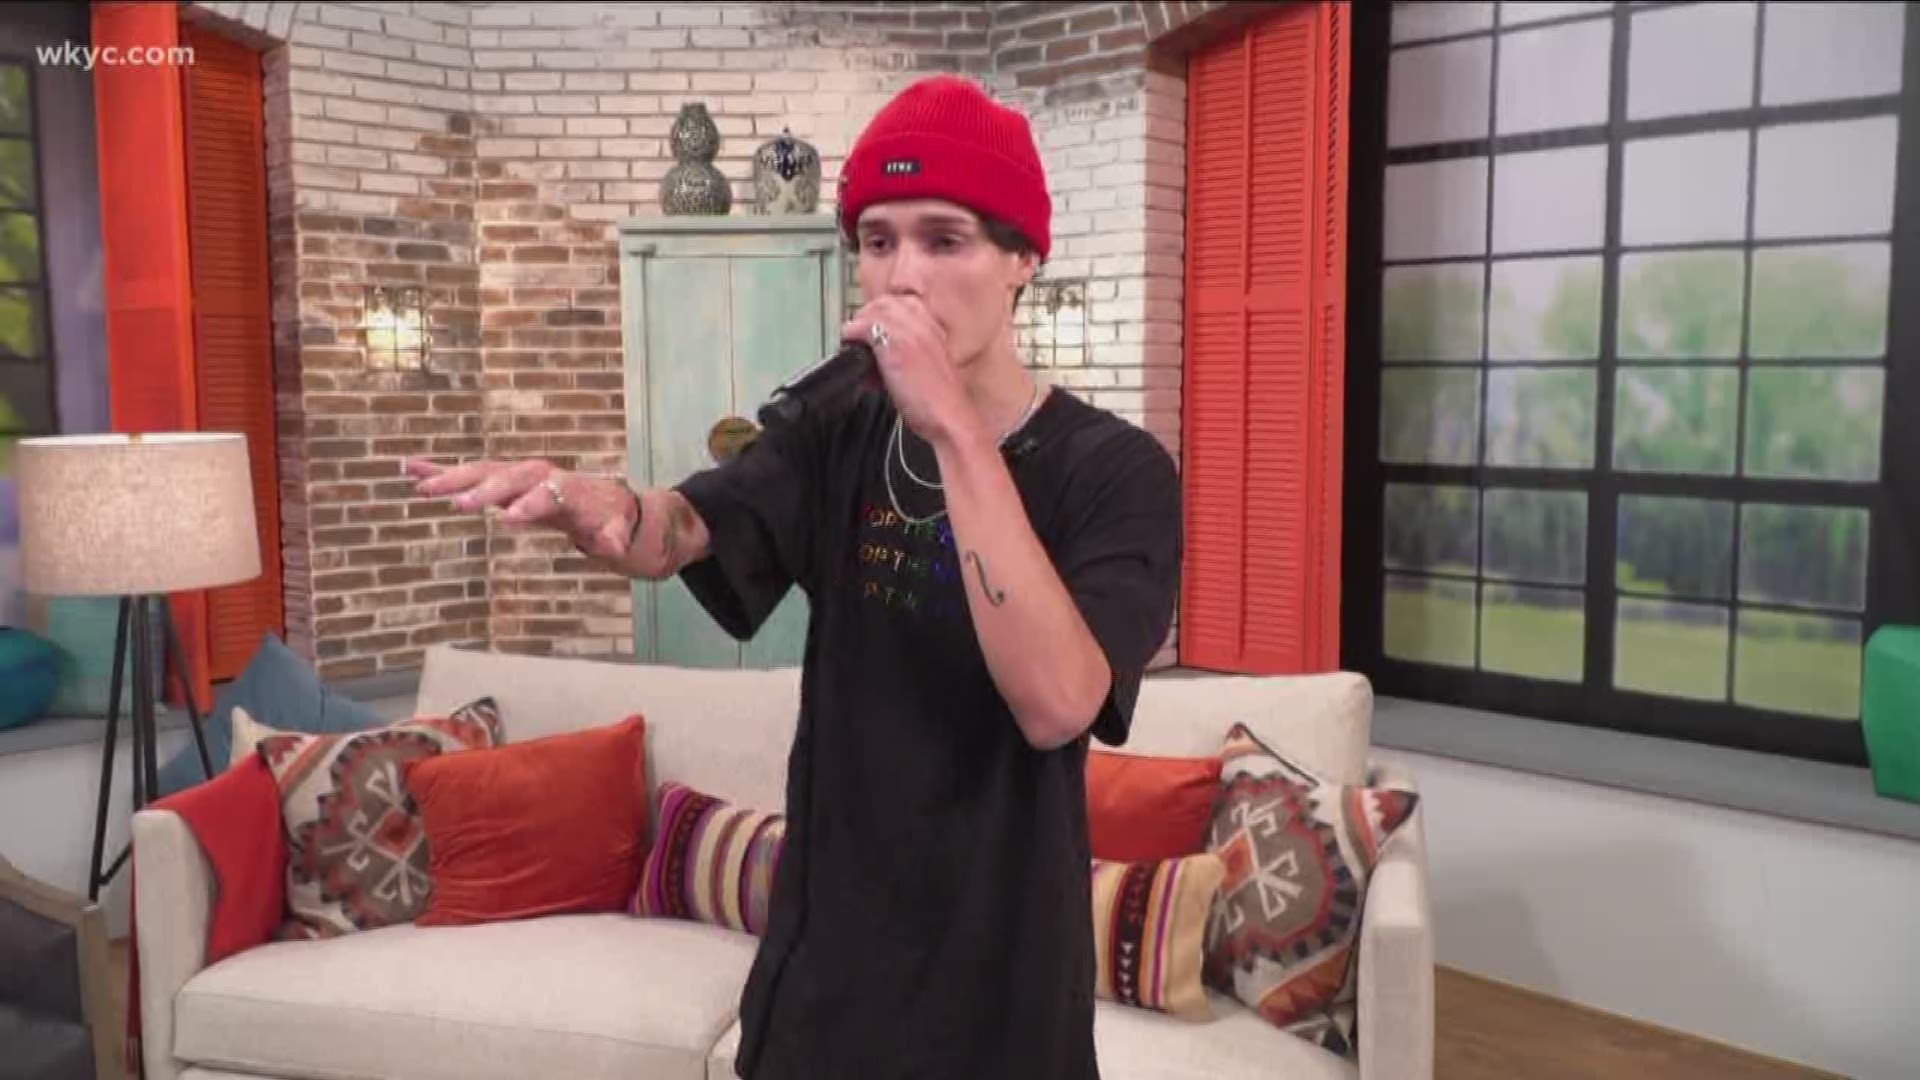 June 12, 2019: What a special treat! Conor of the In Real Life boy band performed a freestyle rap live on our show. The Shaker Heights native is preparing to perform at the House of Blues in Cleveland.